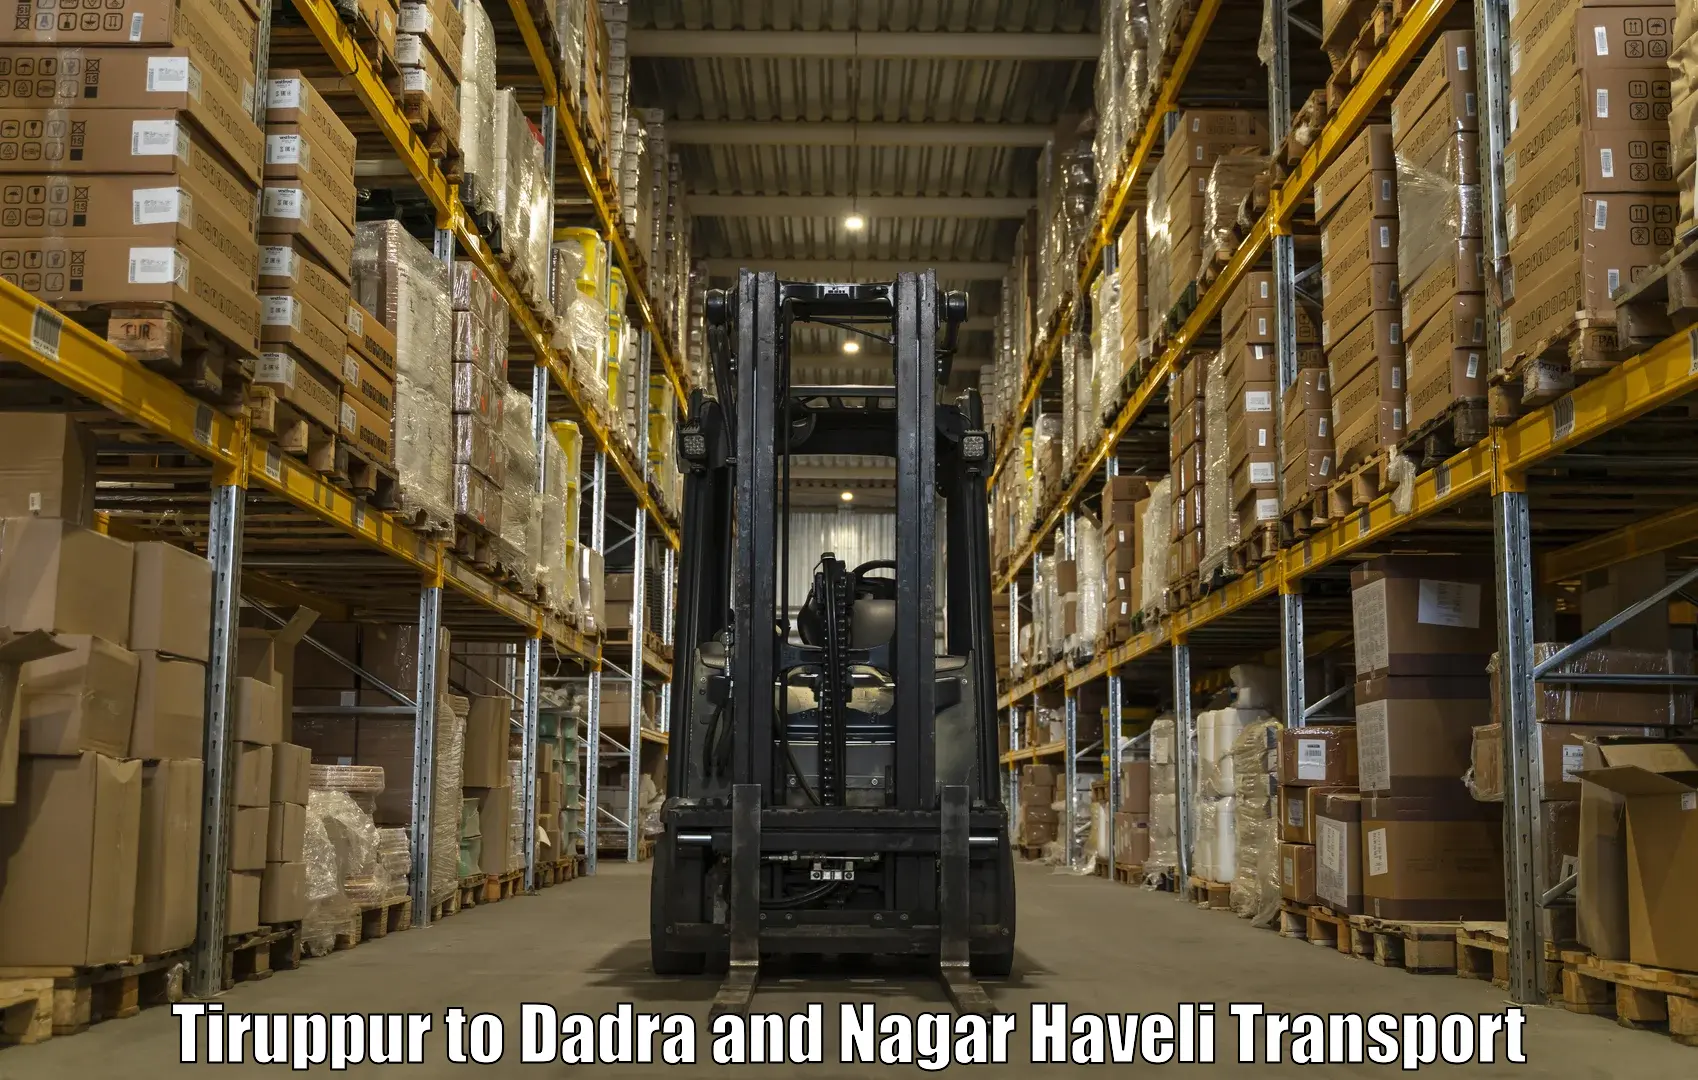 Best transport services in India Tiruppur to Dadra and Nagar Haveli